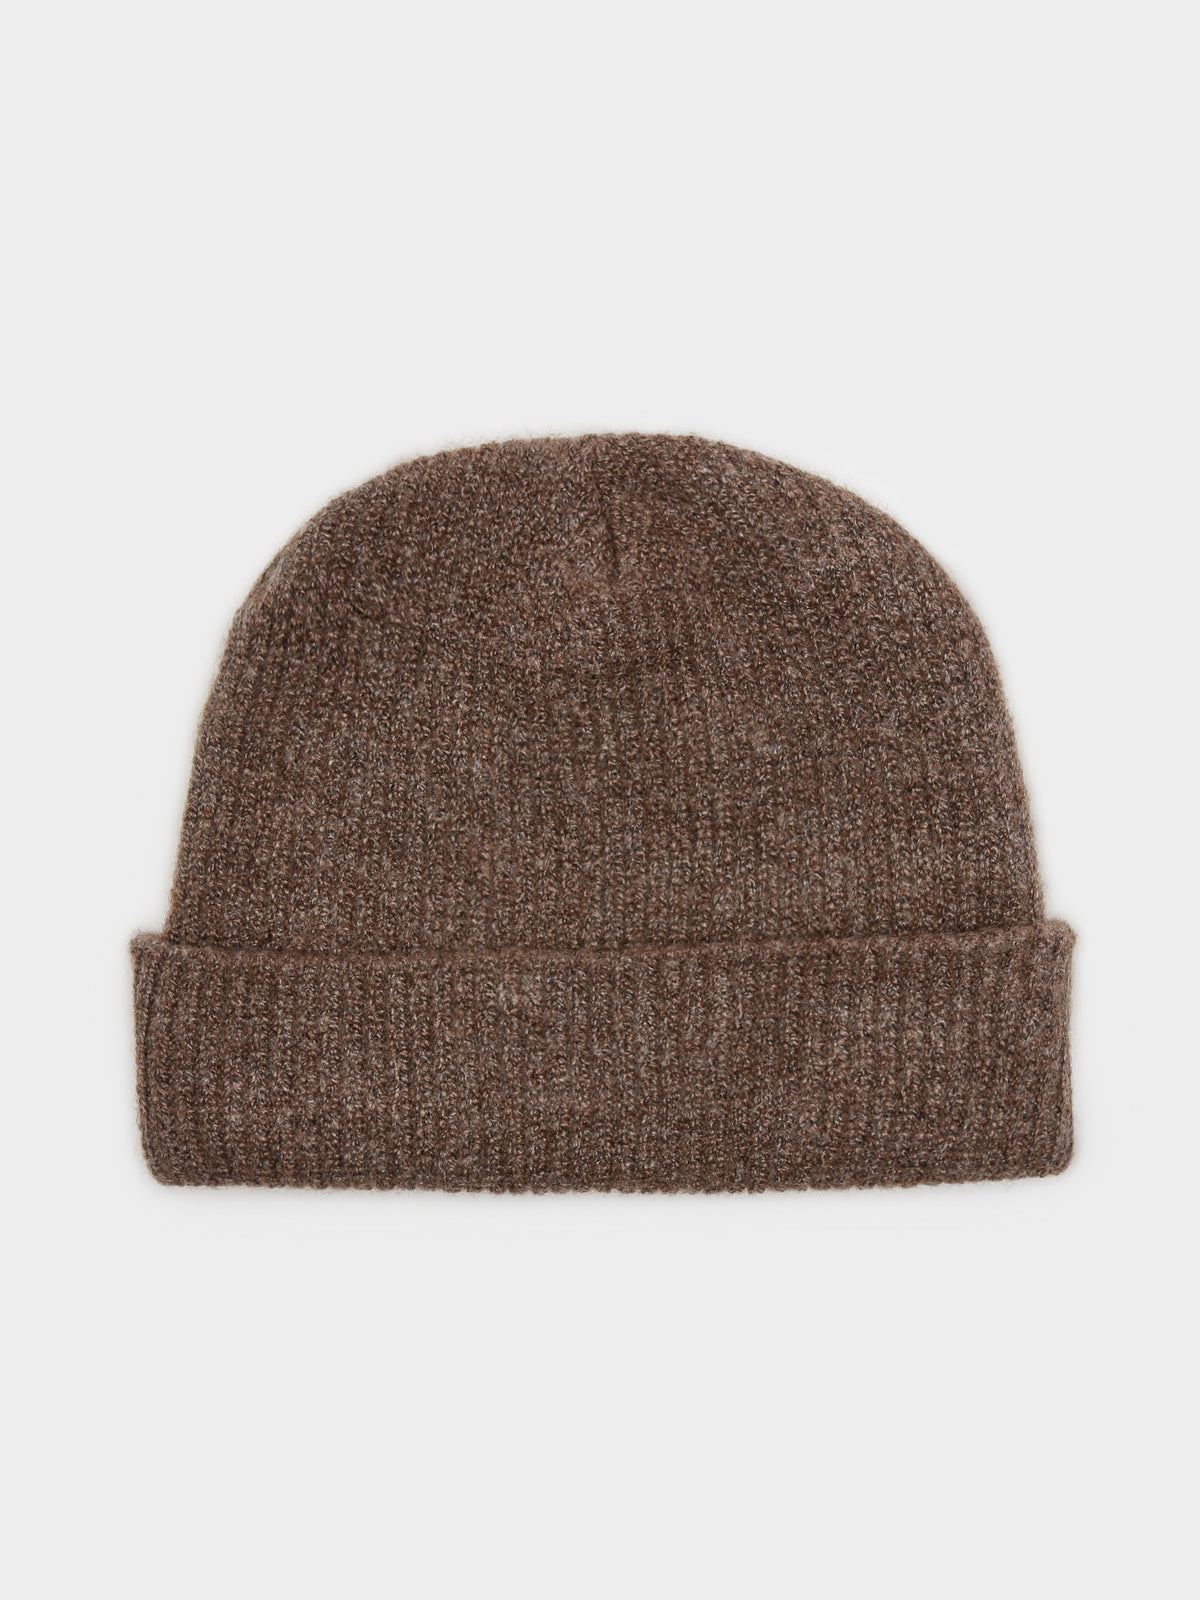 Nude Classic Beanie in Coffee